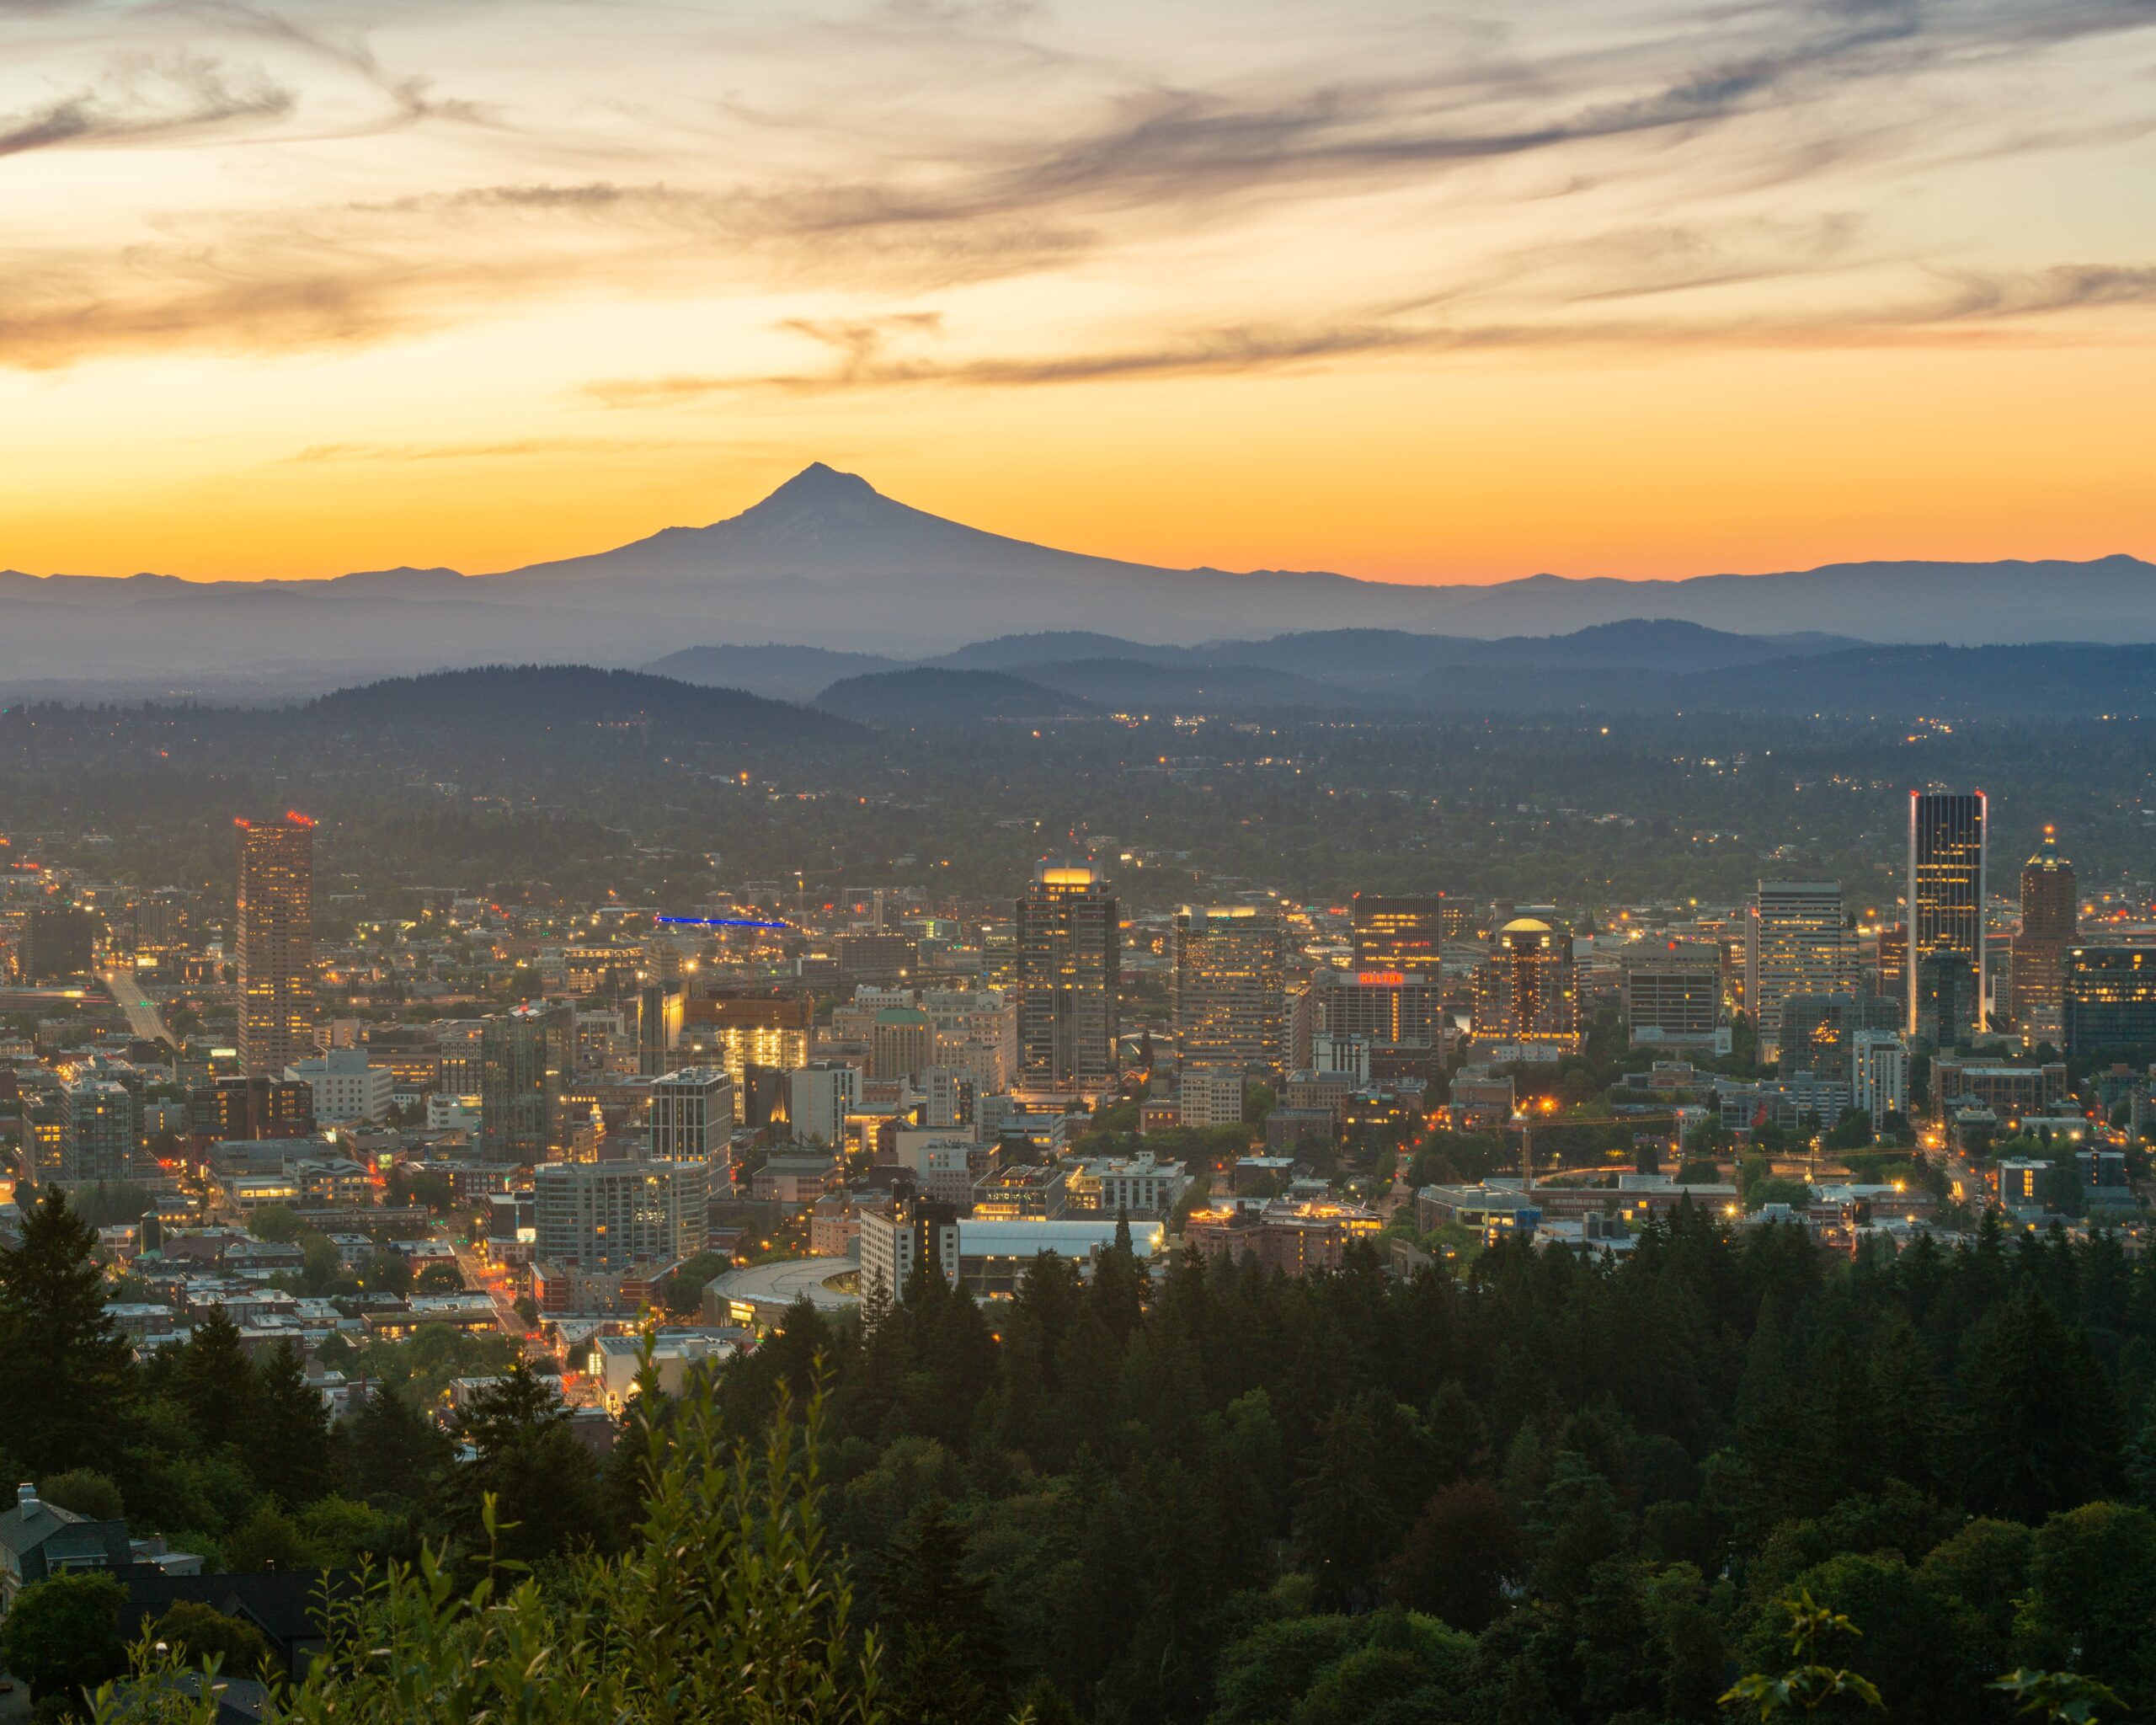 View of Portland, Oregon at sunset with Mount Hood in the background.